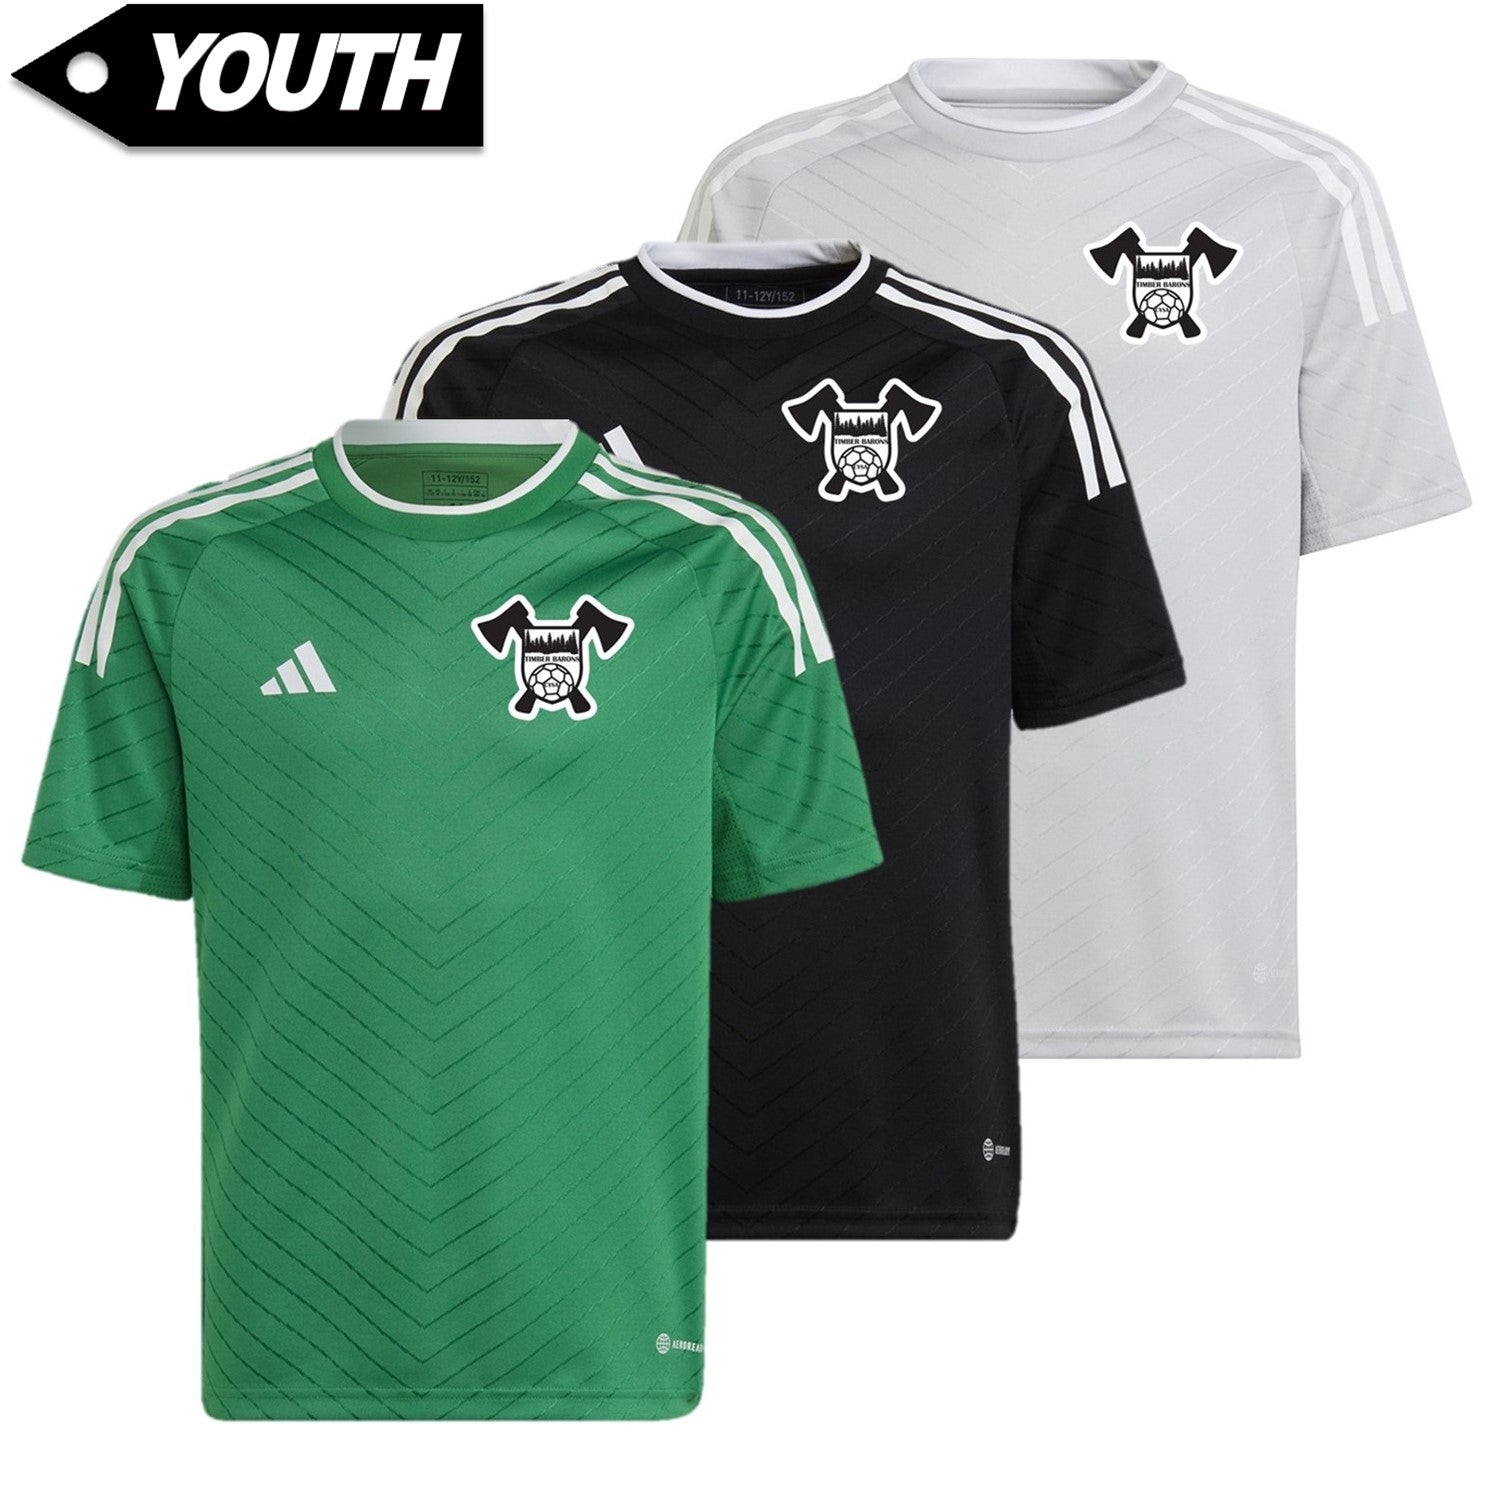 Youth Barons Black Jersey